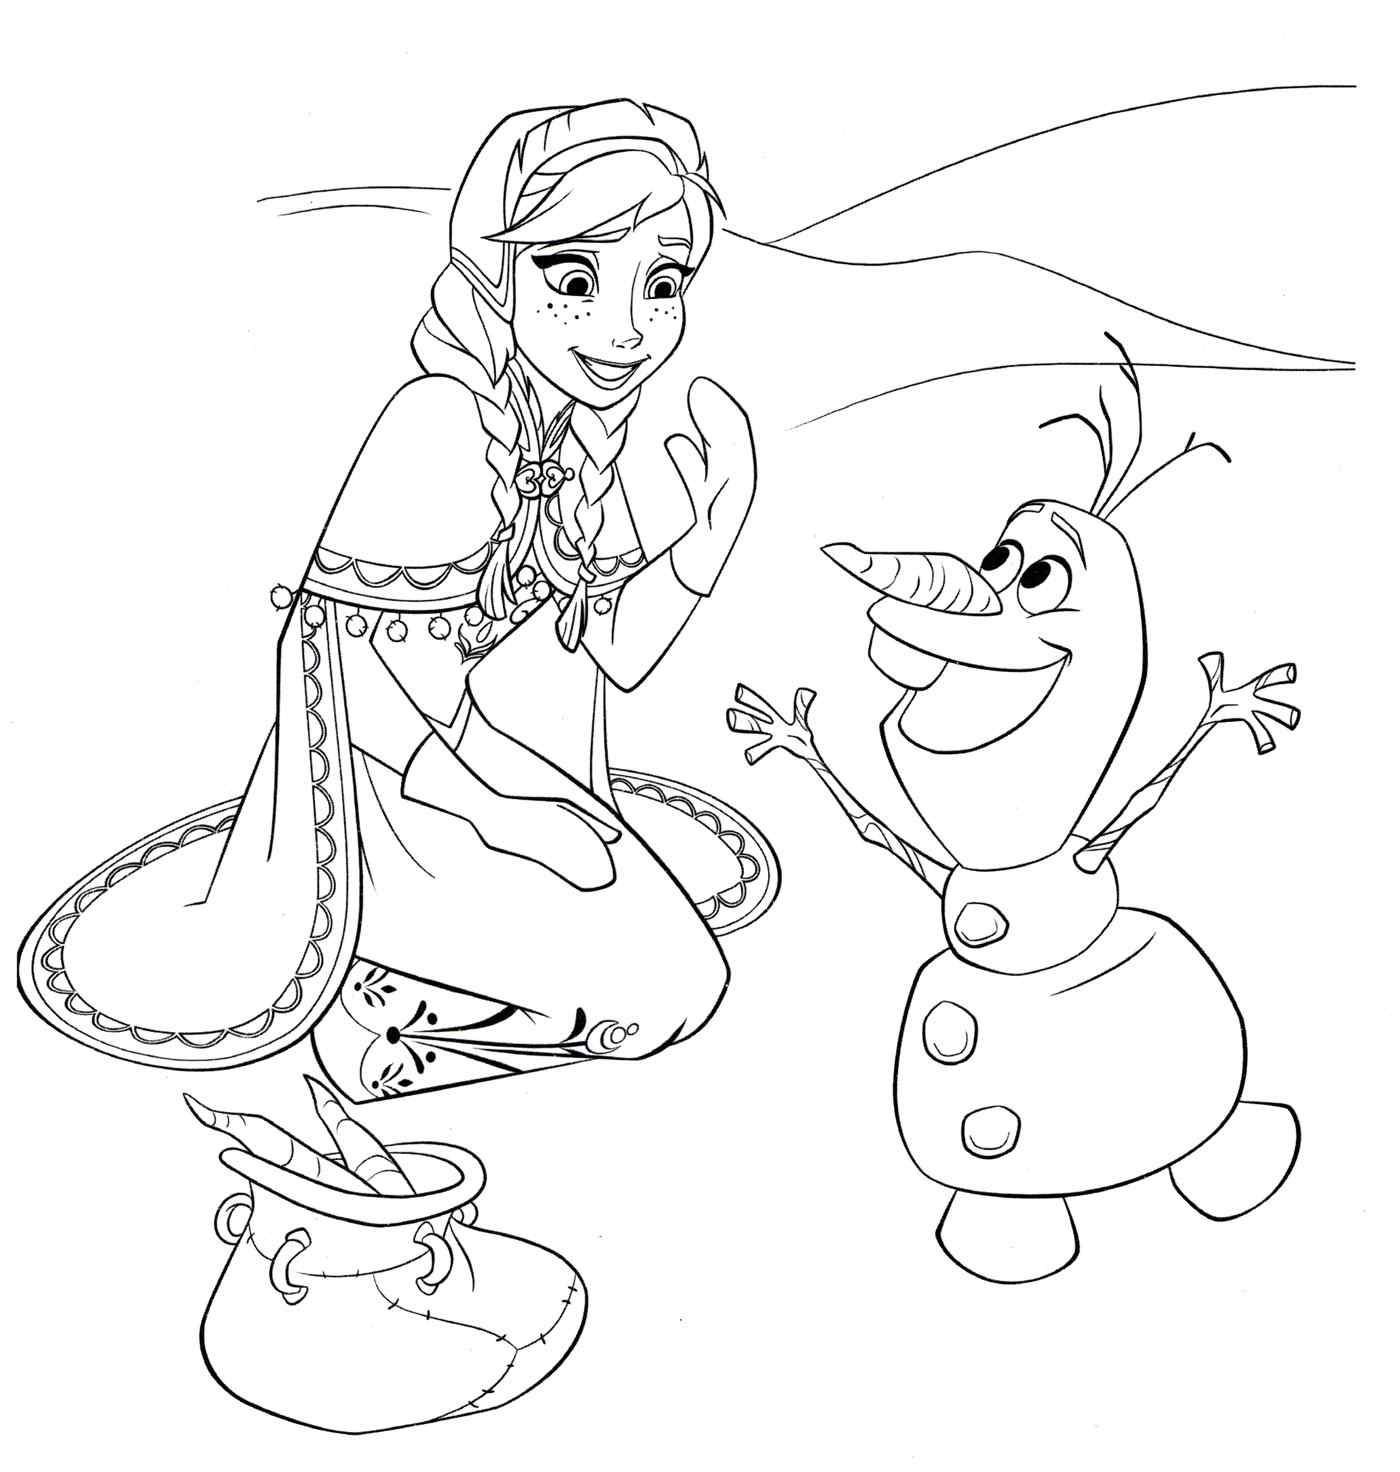 The Little Snowman Is Always There Coloring Page